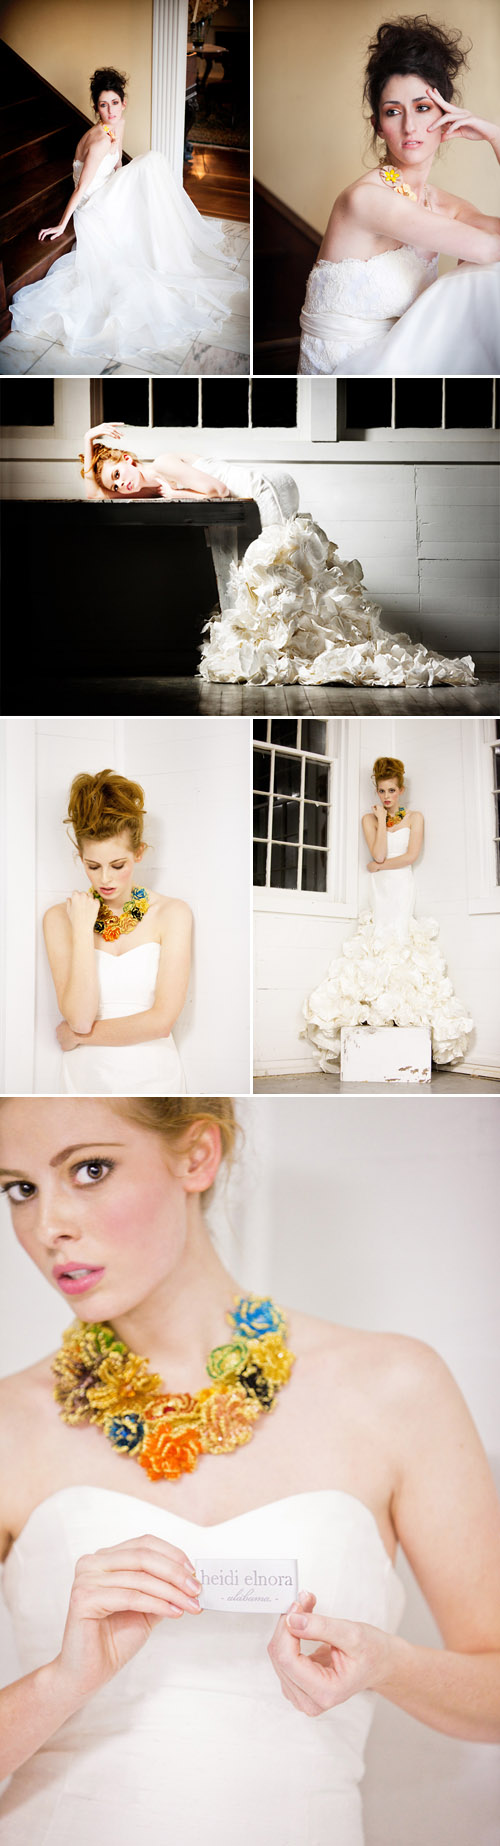 Heidi Elnora 2011 wedding dress collection photographed by Leslee Mitchell